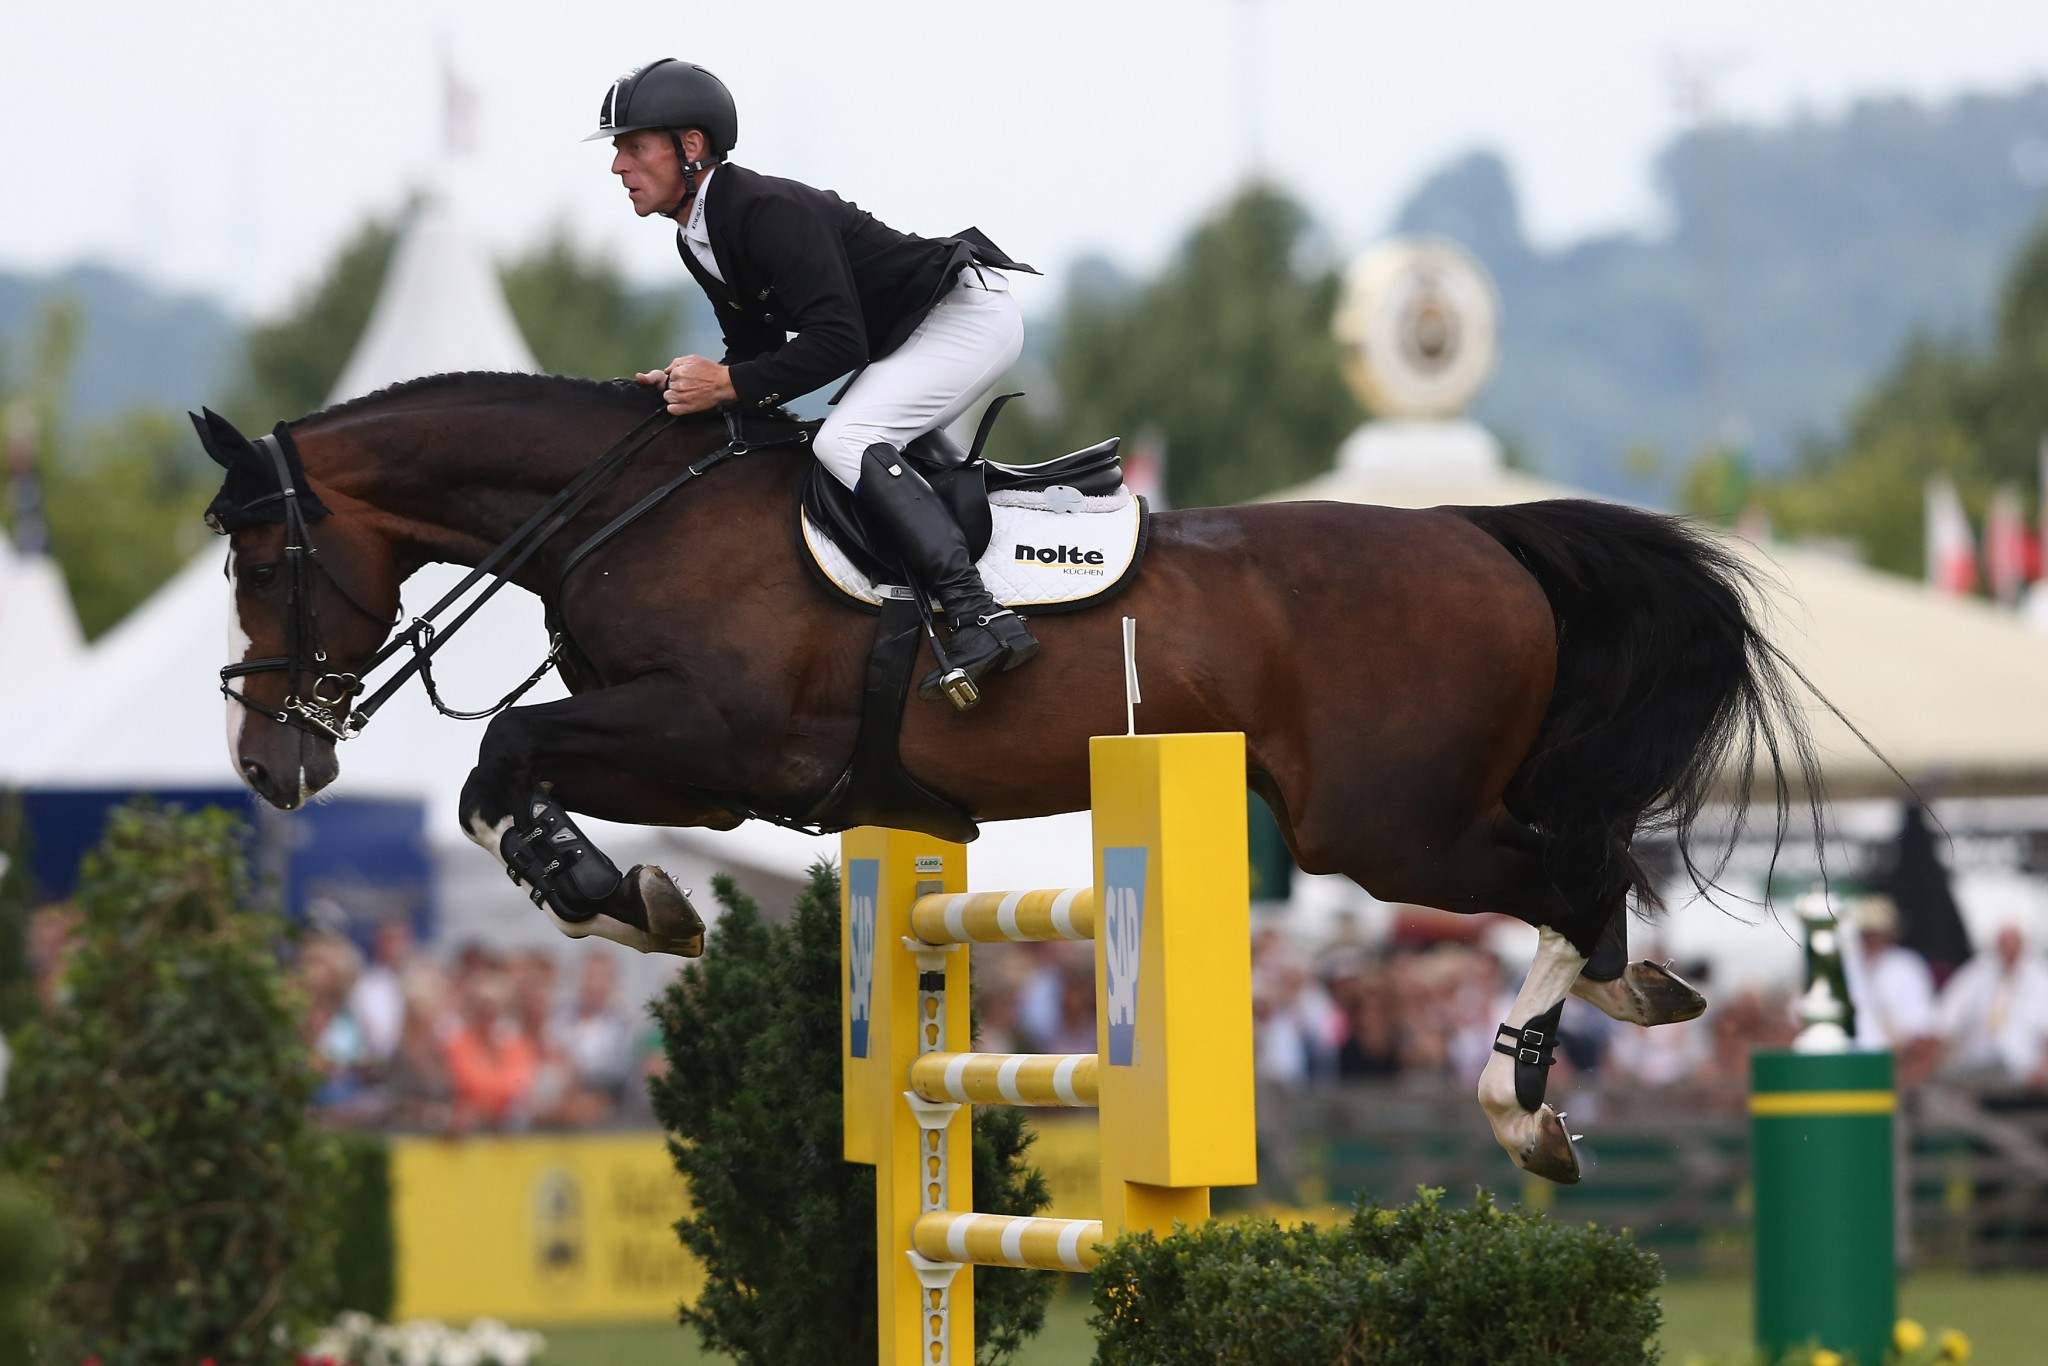 Ehning aiming for record fourth FEI World Cup Jumping title in Las Vegas 